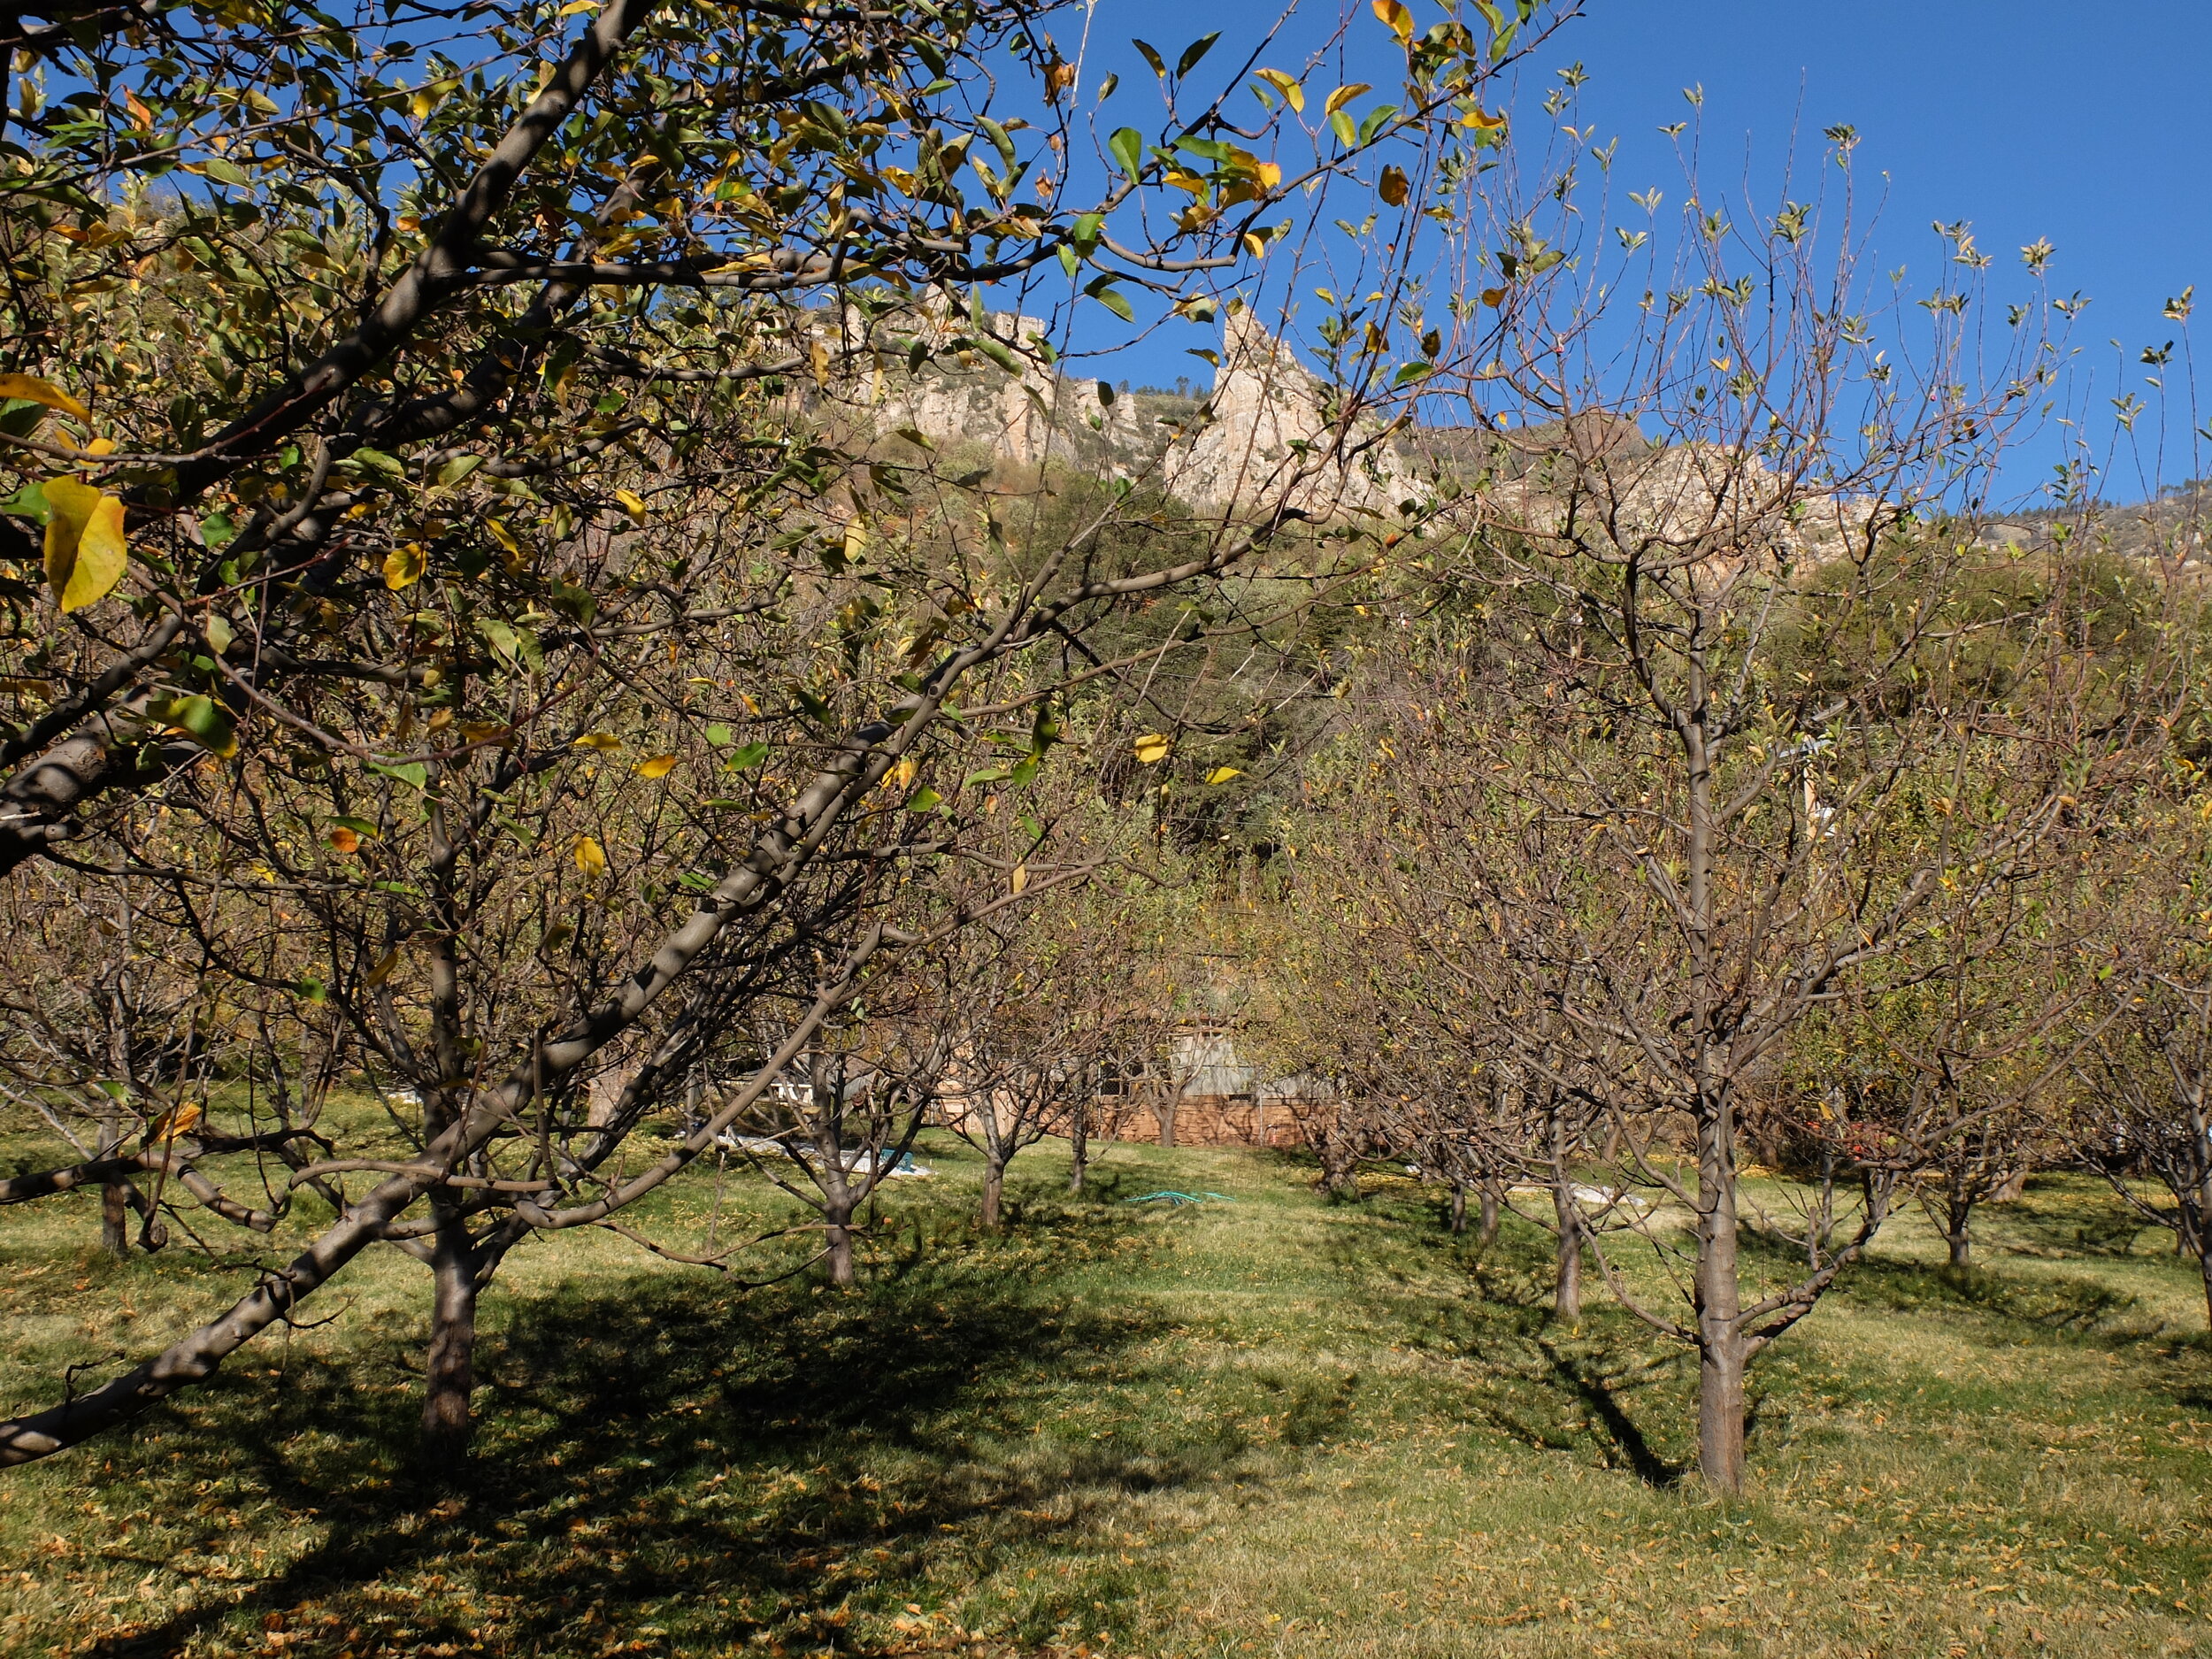 Orchard Canyon on Oak Creek - One of the apple orchards.